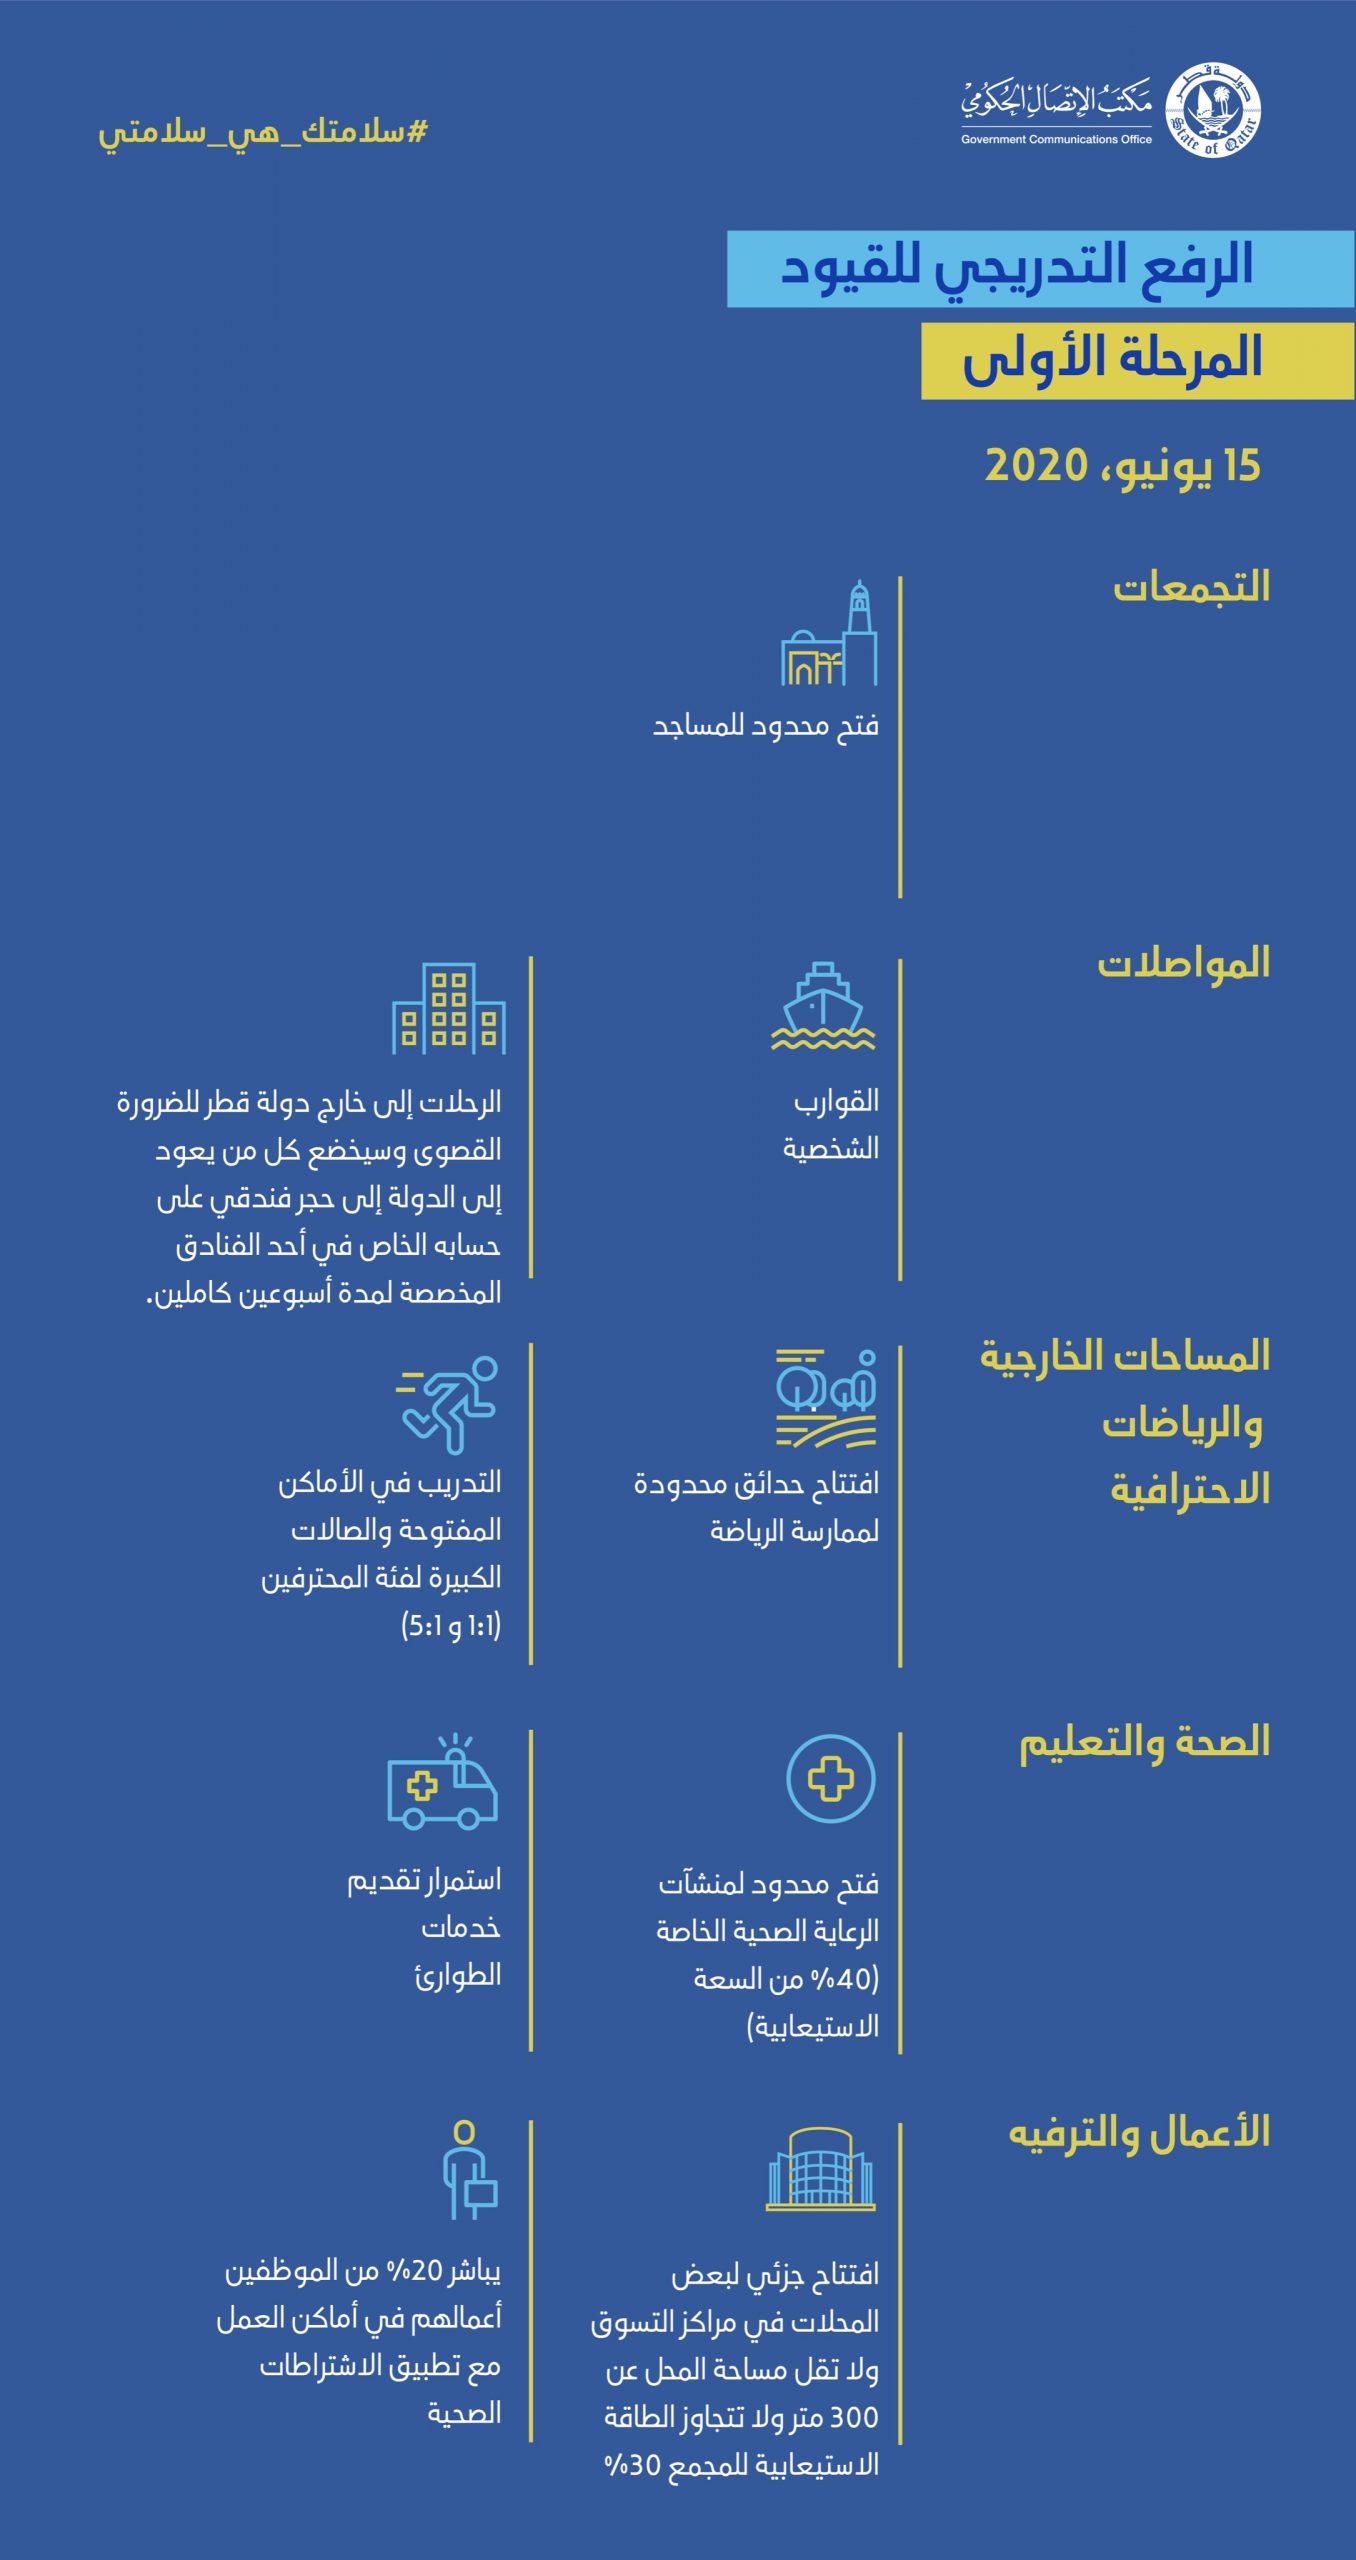 Qatar’s plans to ease COVID-19 restrictions in four phases beginning 15 June